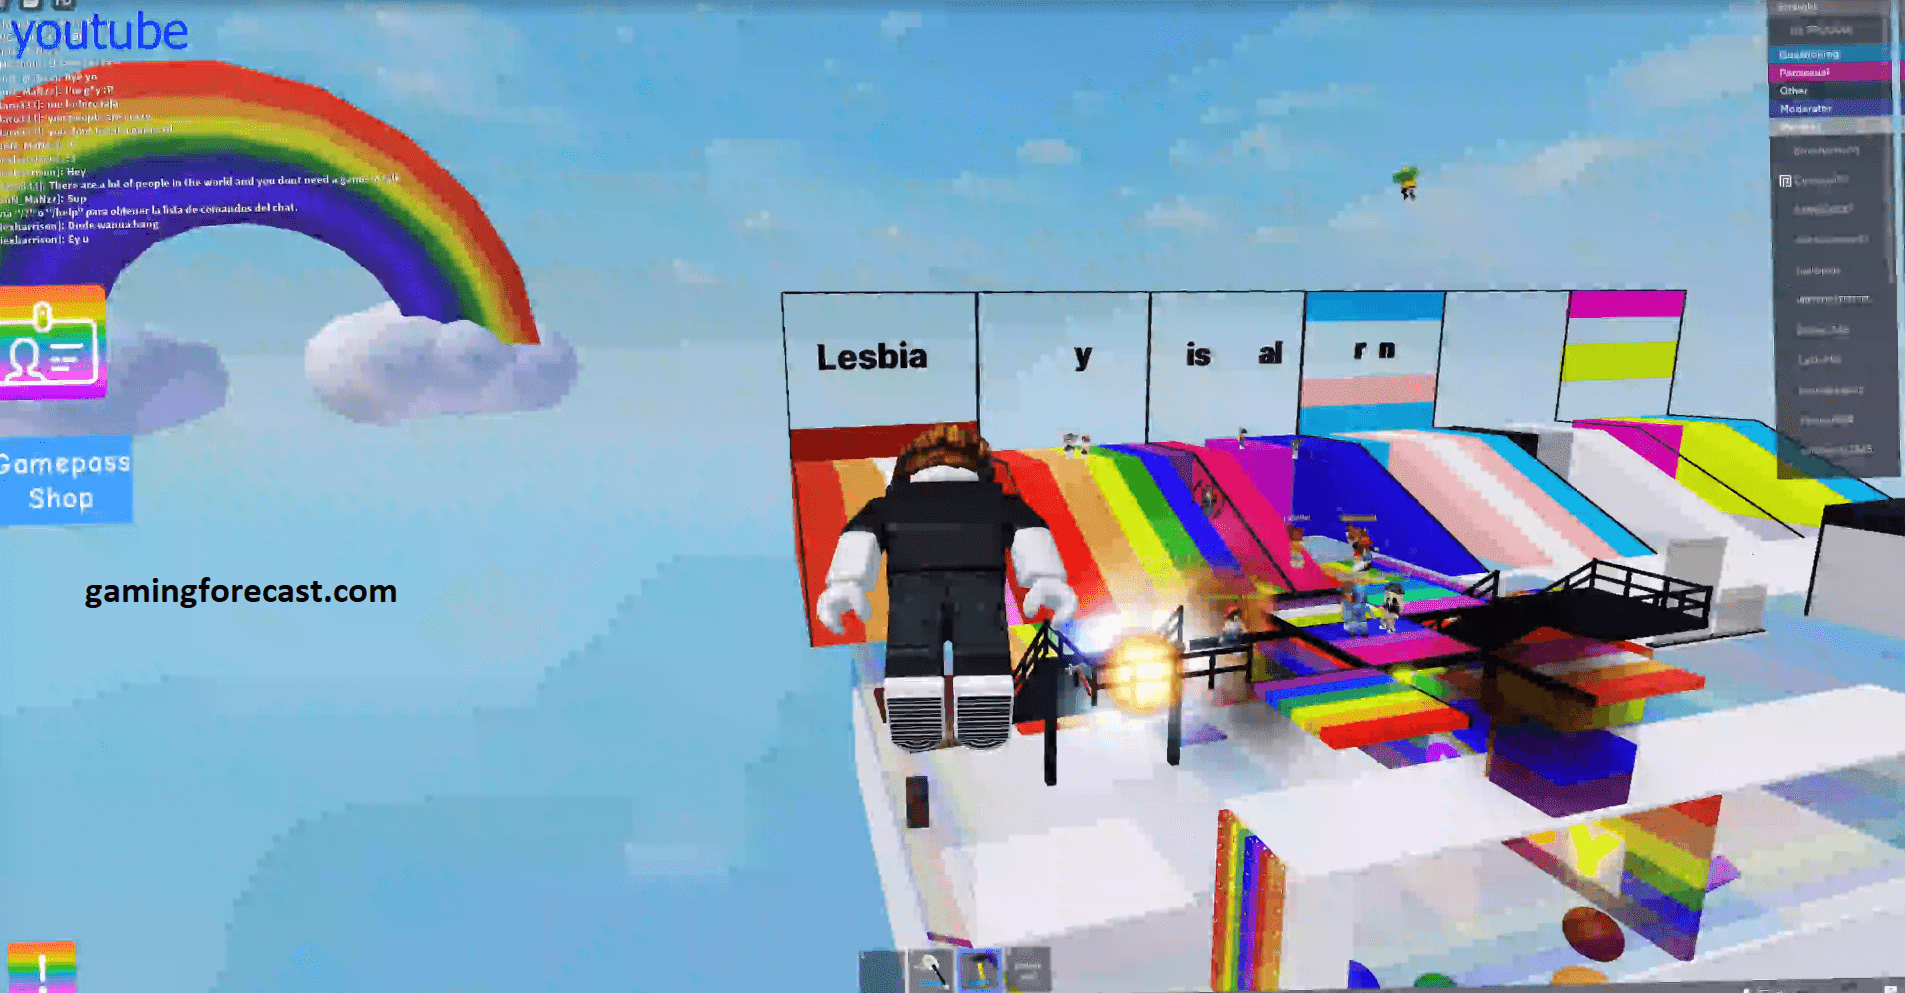 Roblox Hack Download Pc Destroy Lobby Fly Aimbot Scripts 2021 Gaming Forecast Download Free Online Game Hacks - game hacks roblox